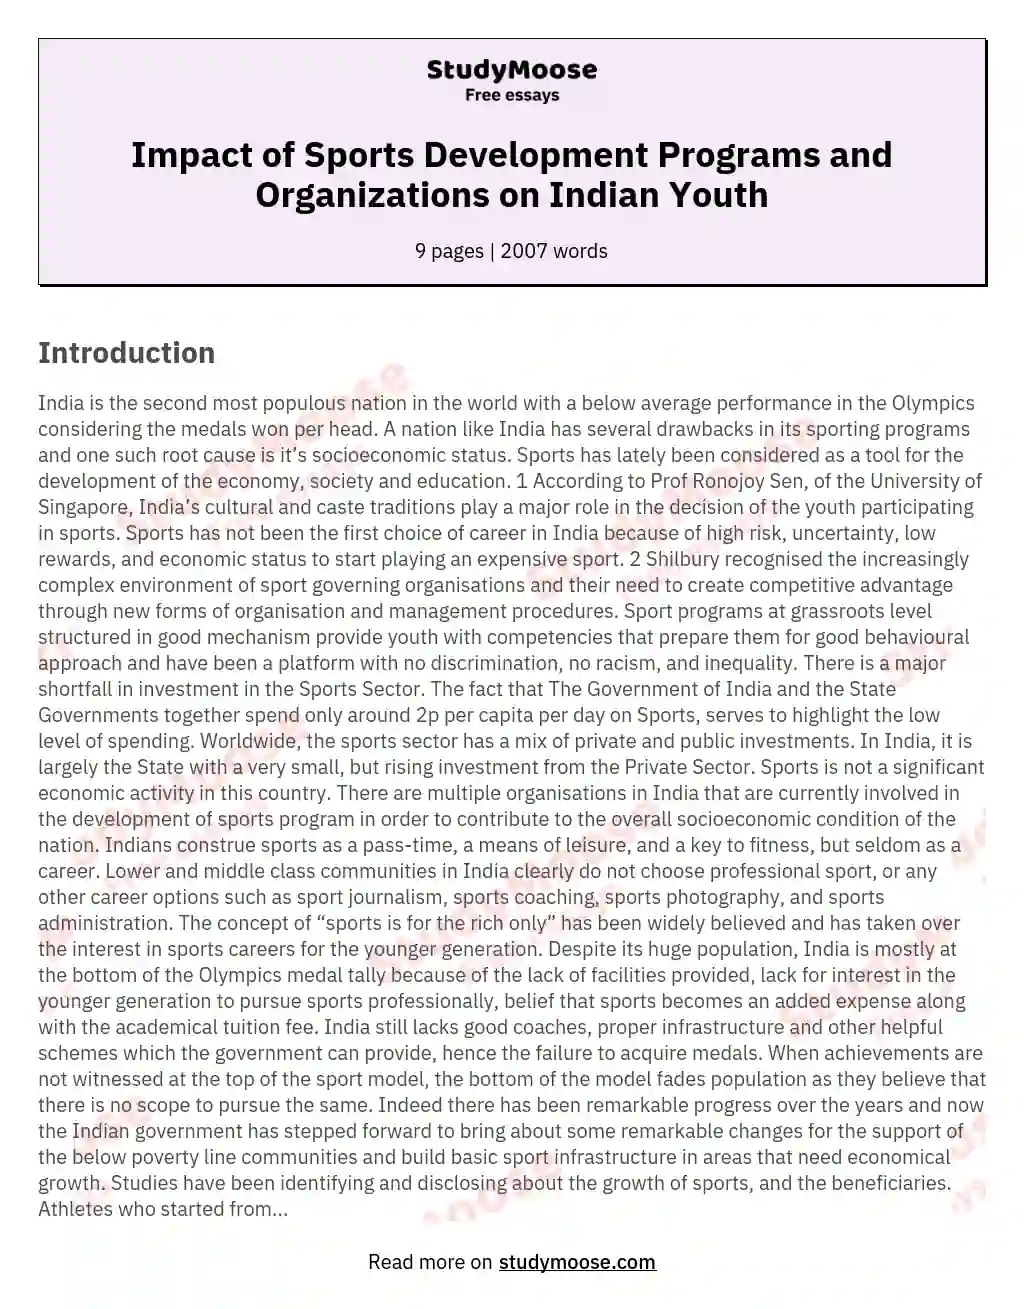 Impact of Sports Development Programs and Organizations on Indian Youth essay